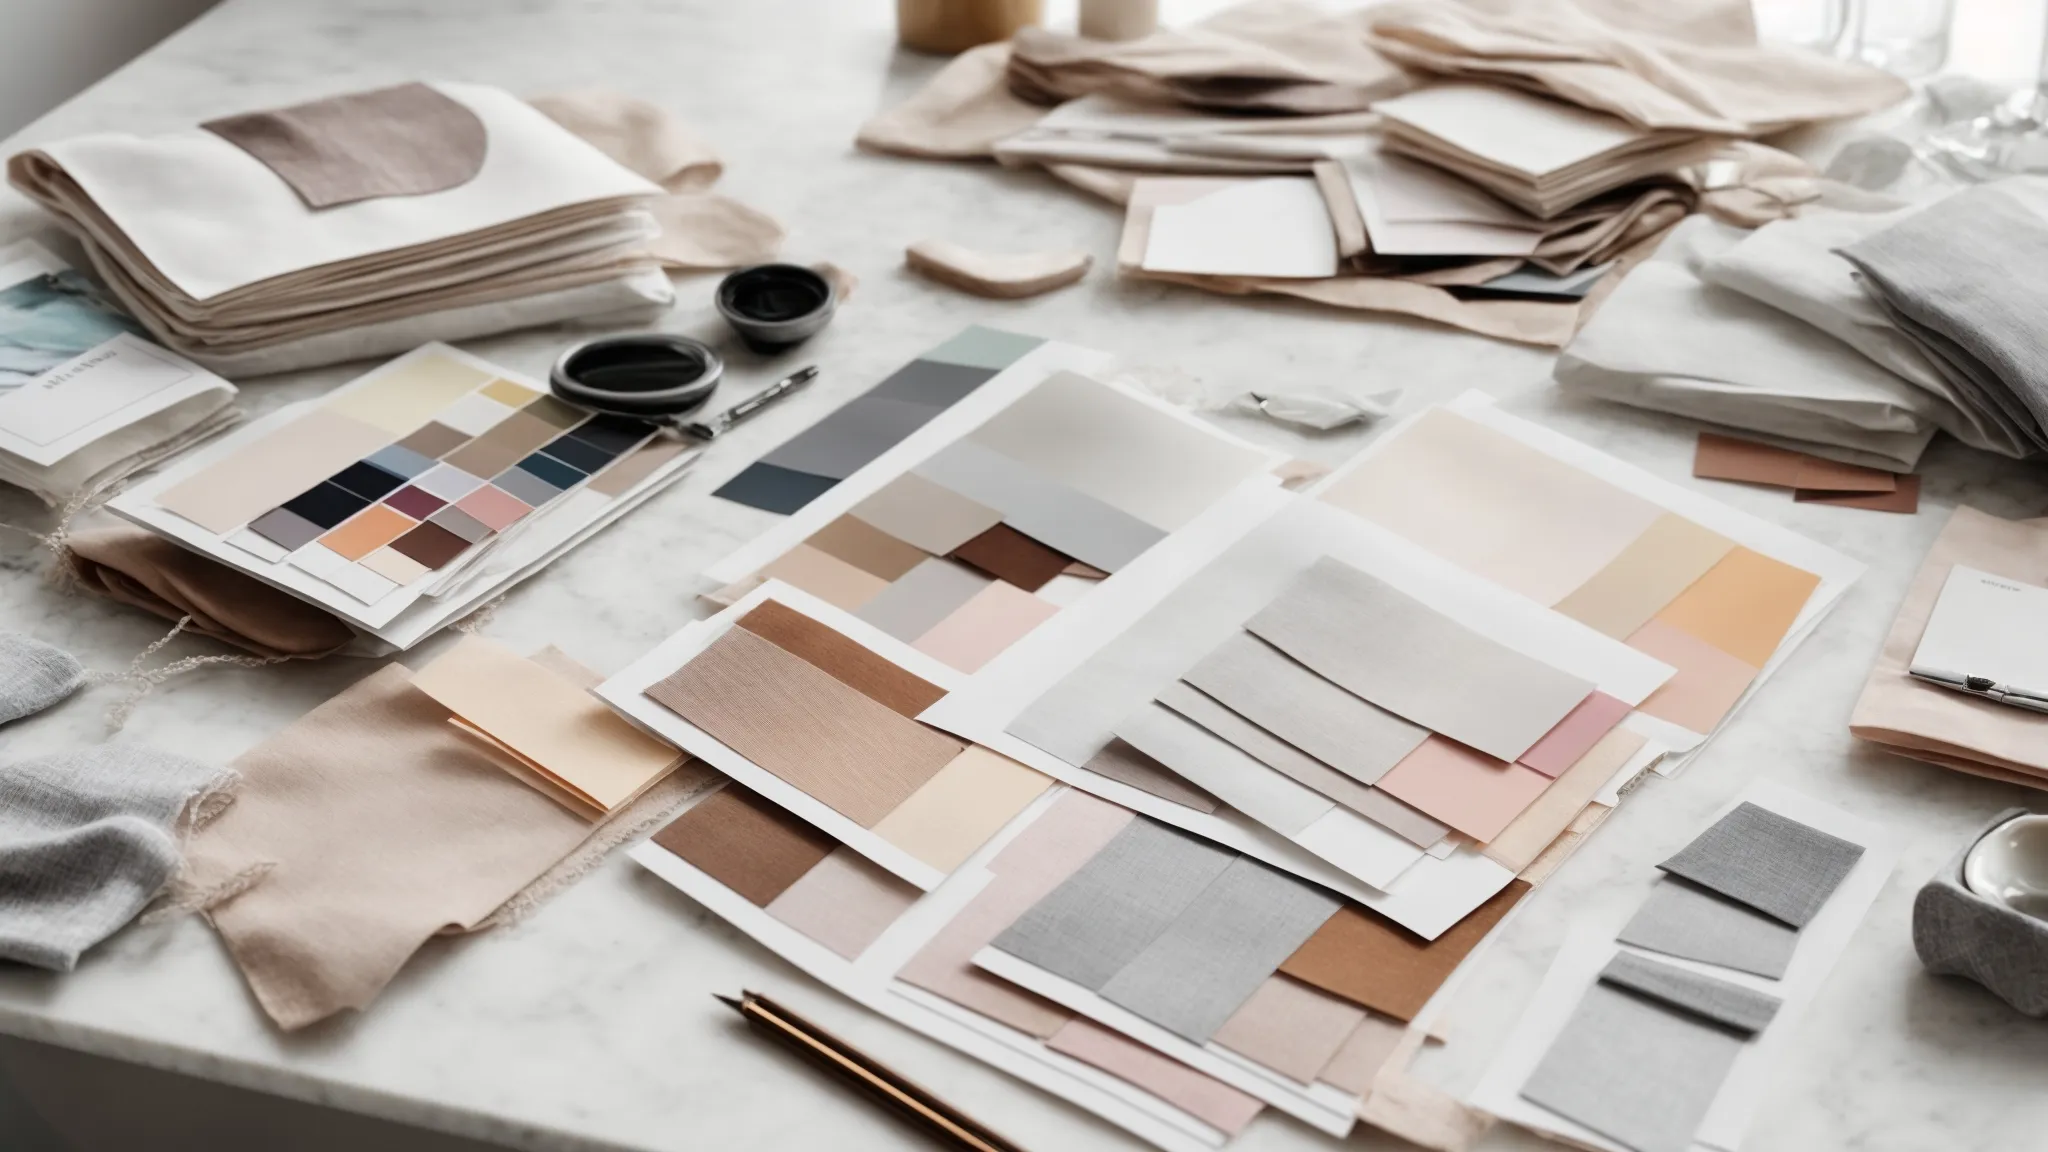 A Mood Board Covered With Fabric Swatches, Color Palettes, And Design Sketches Lies On A Sleek White Table, Surrounded By Creative Tools, Embodying The Essence Of Brand Differentiation.